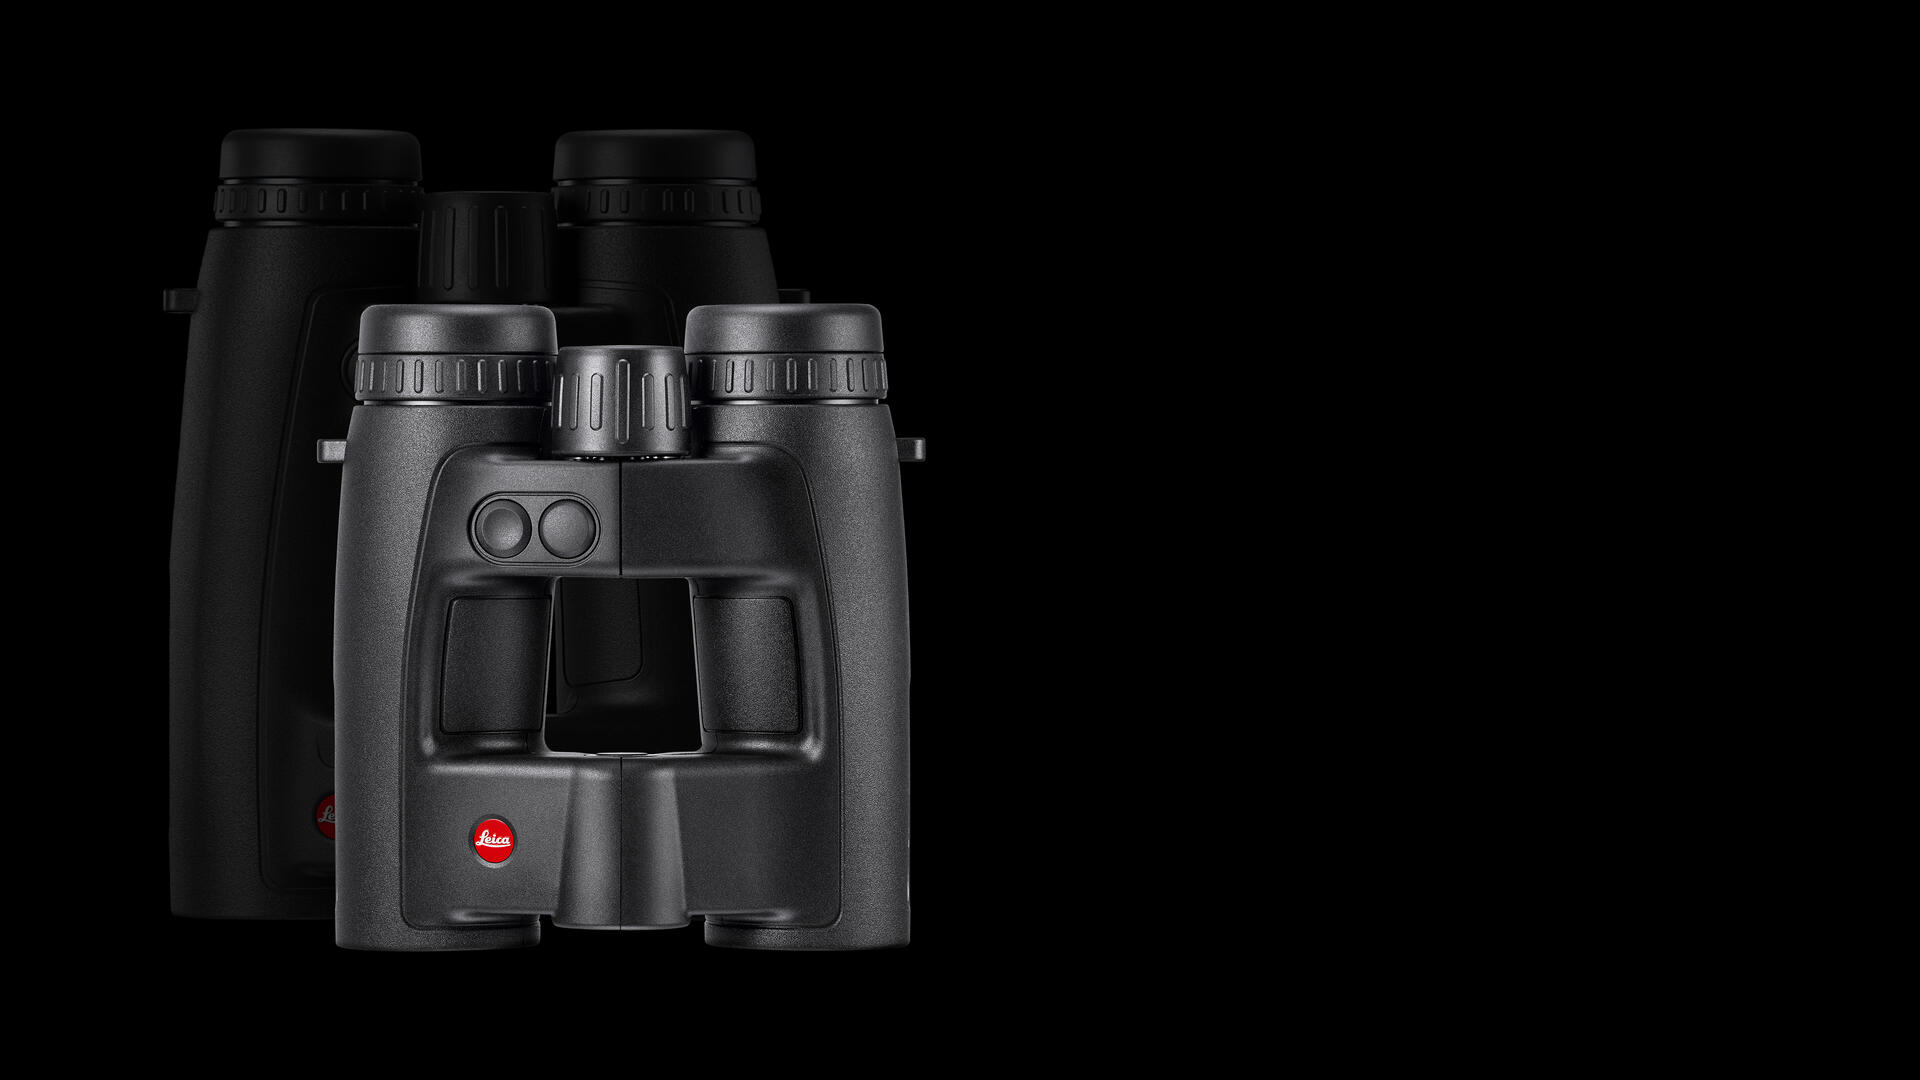 Leica-Geovid-32-Pro-–-True-greatness-comes-from-within_3840x2160